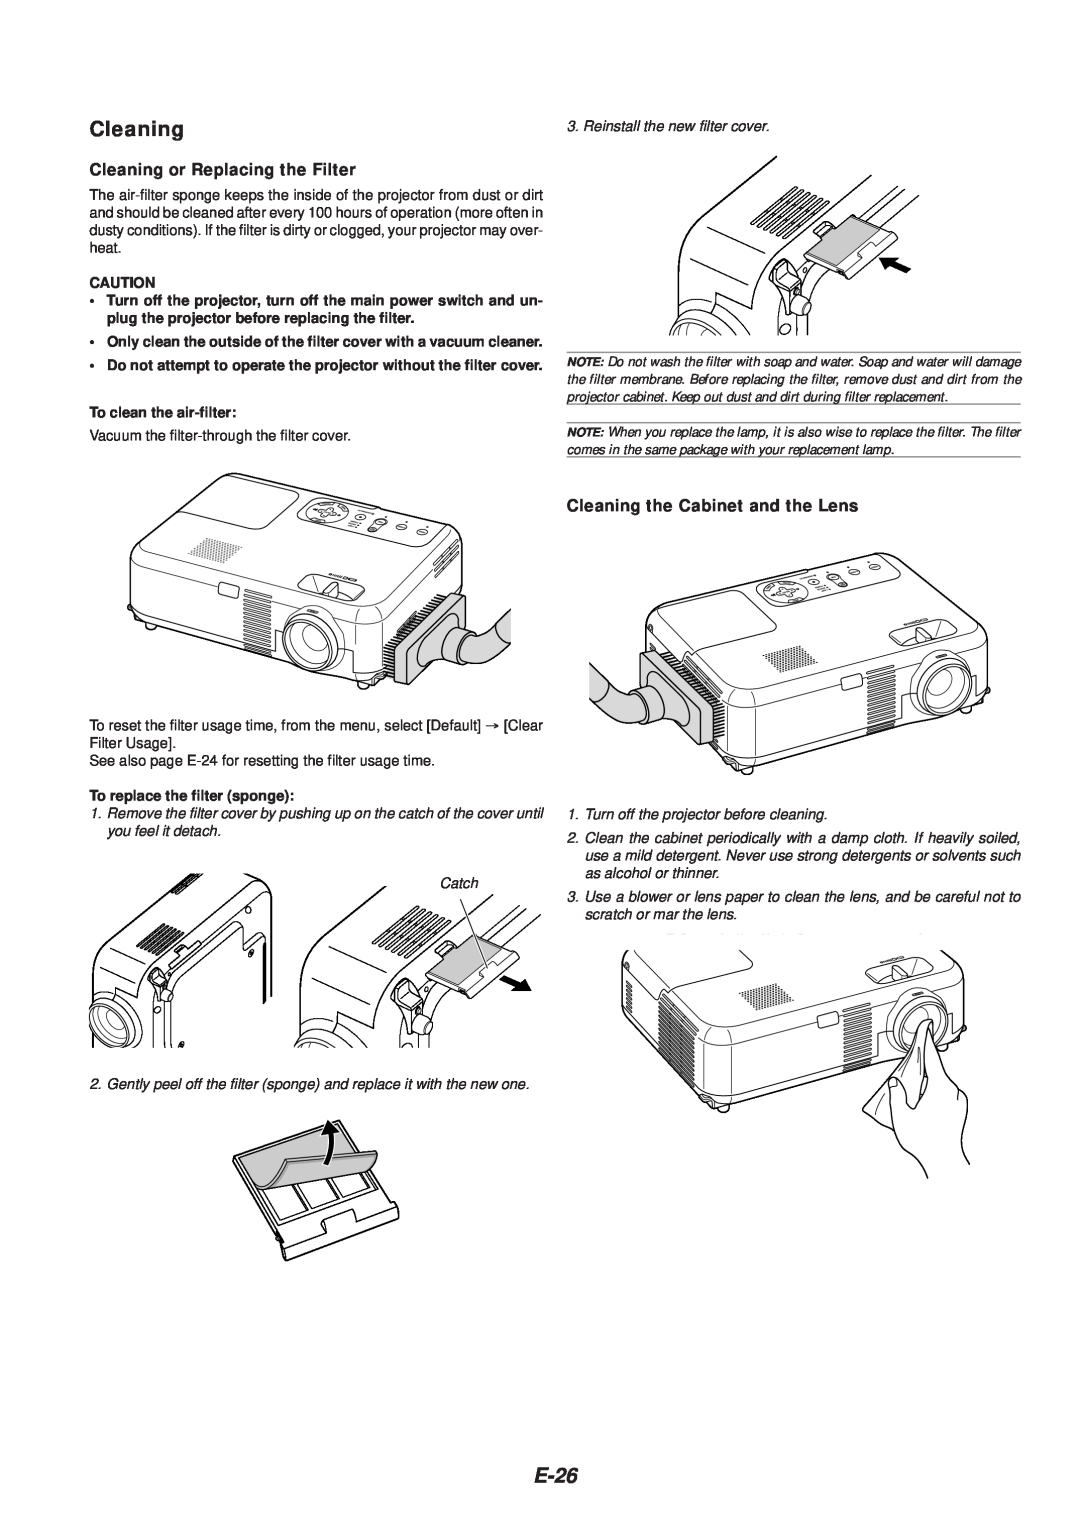 NEC VT46 user manual E-26, Cleaning or Replacing the Filter, Cleaning the Cabinet and the Lens, To clean the air-filter 